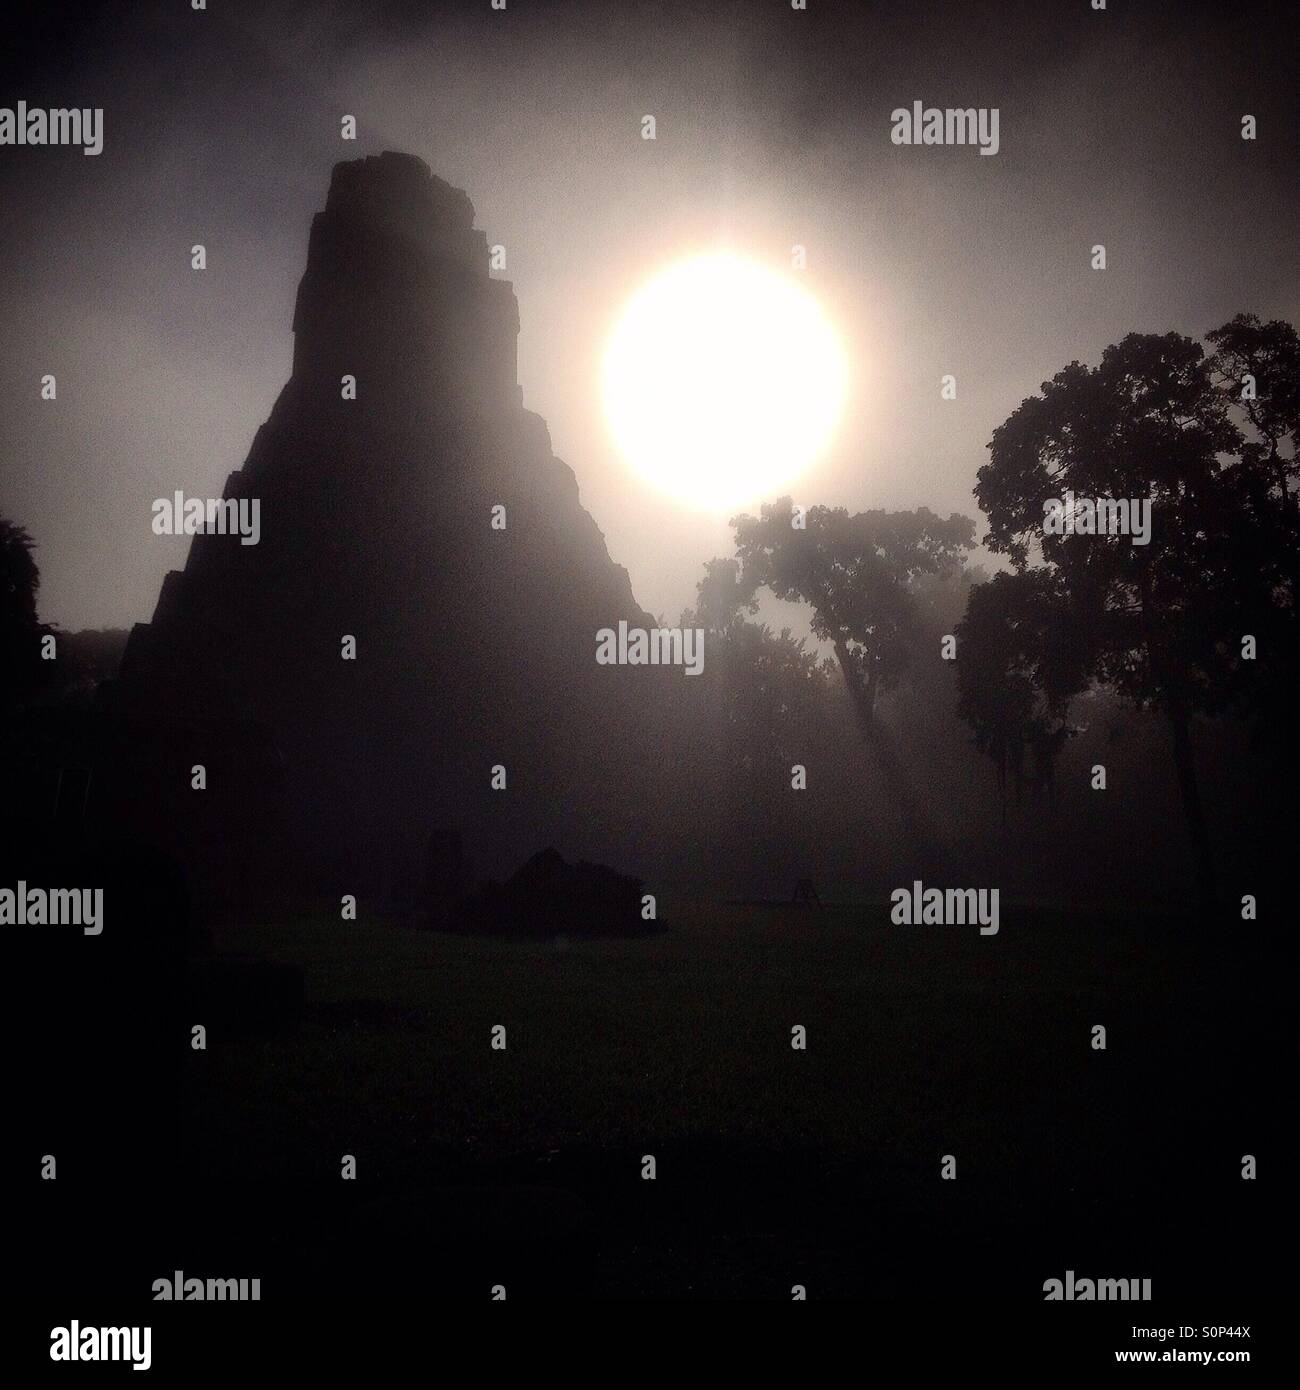 The sun shines in a foggy morning in the Mayan city of Tikal, Peten, Guatemala Stock Photo